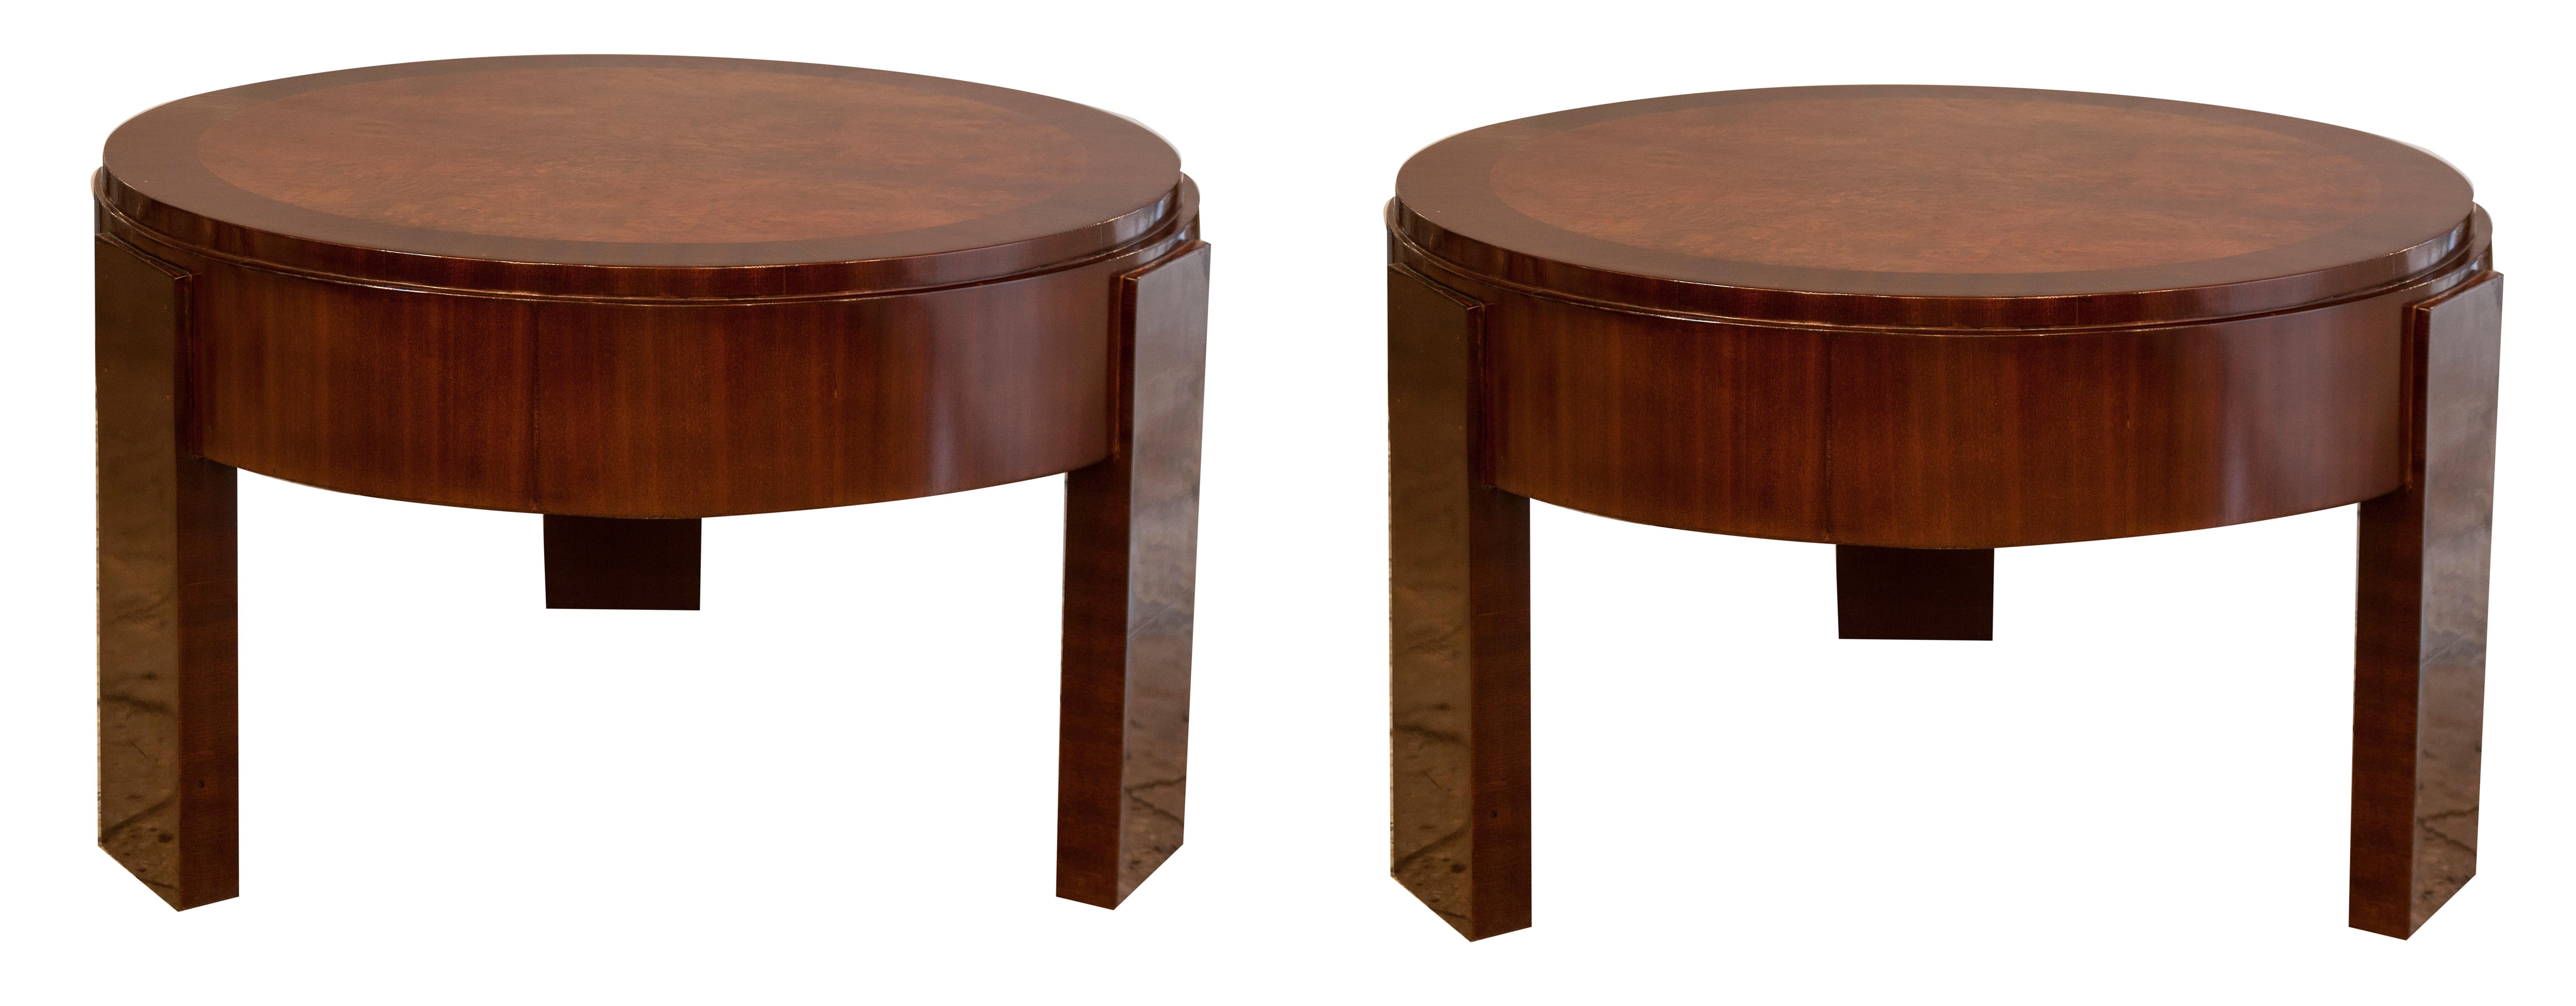 2 Tables Art Deco in Wood, France, 1930 For Sale 4